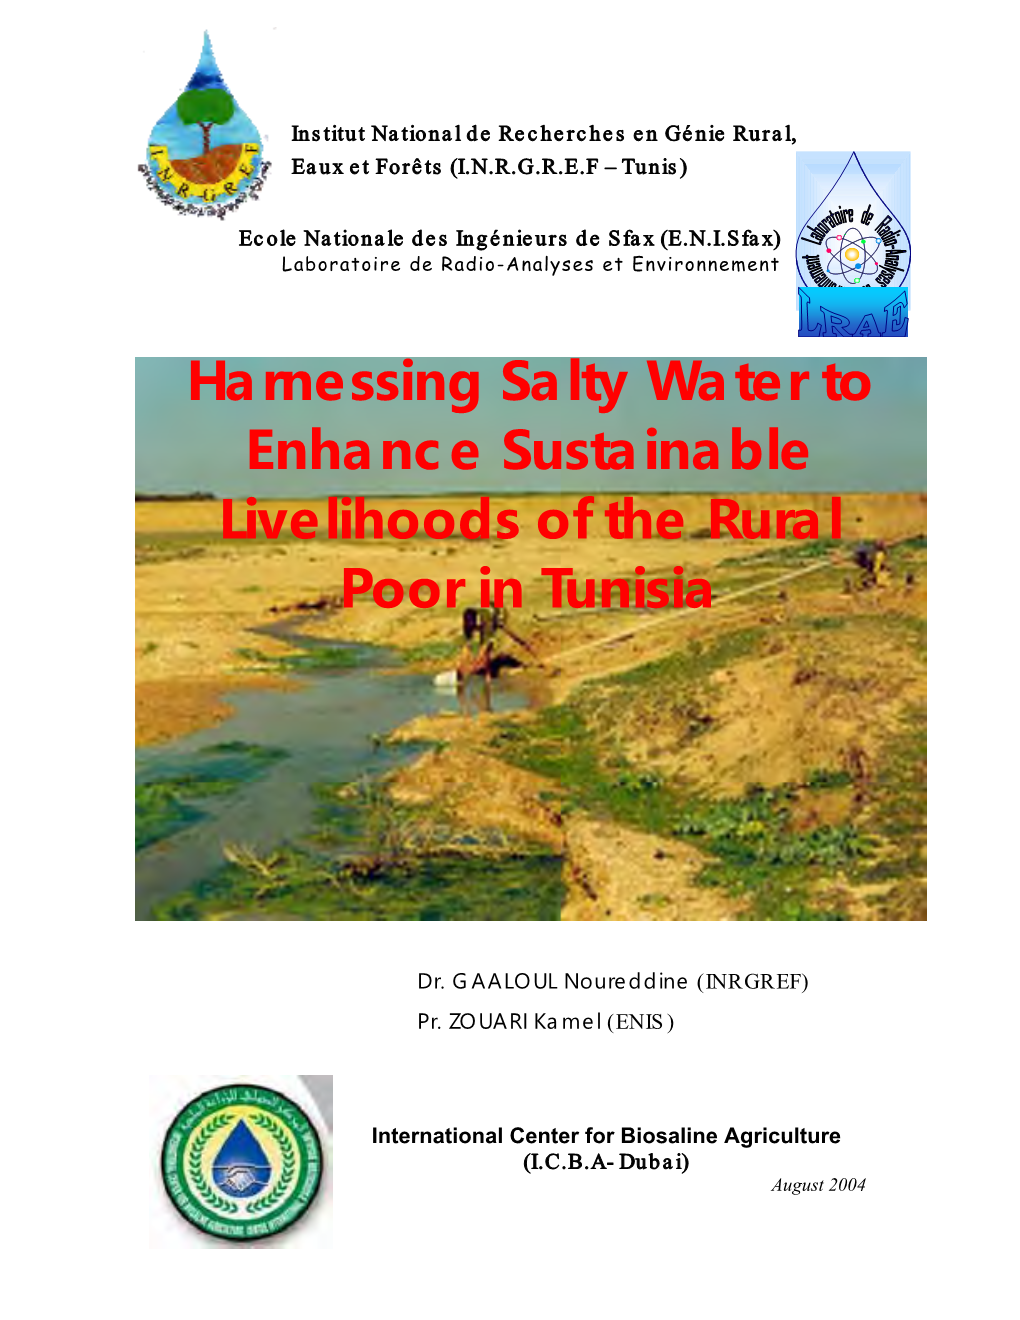 Harnessing Salty Water to Enhance Sustainable Livelihoods of the Rural Poor in Tunisia